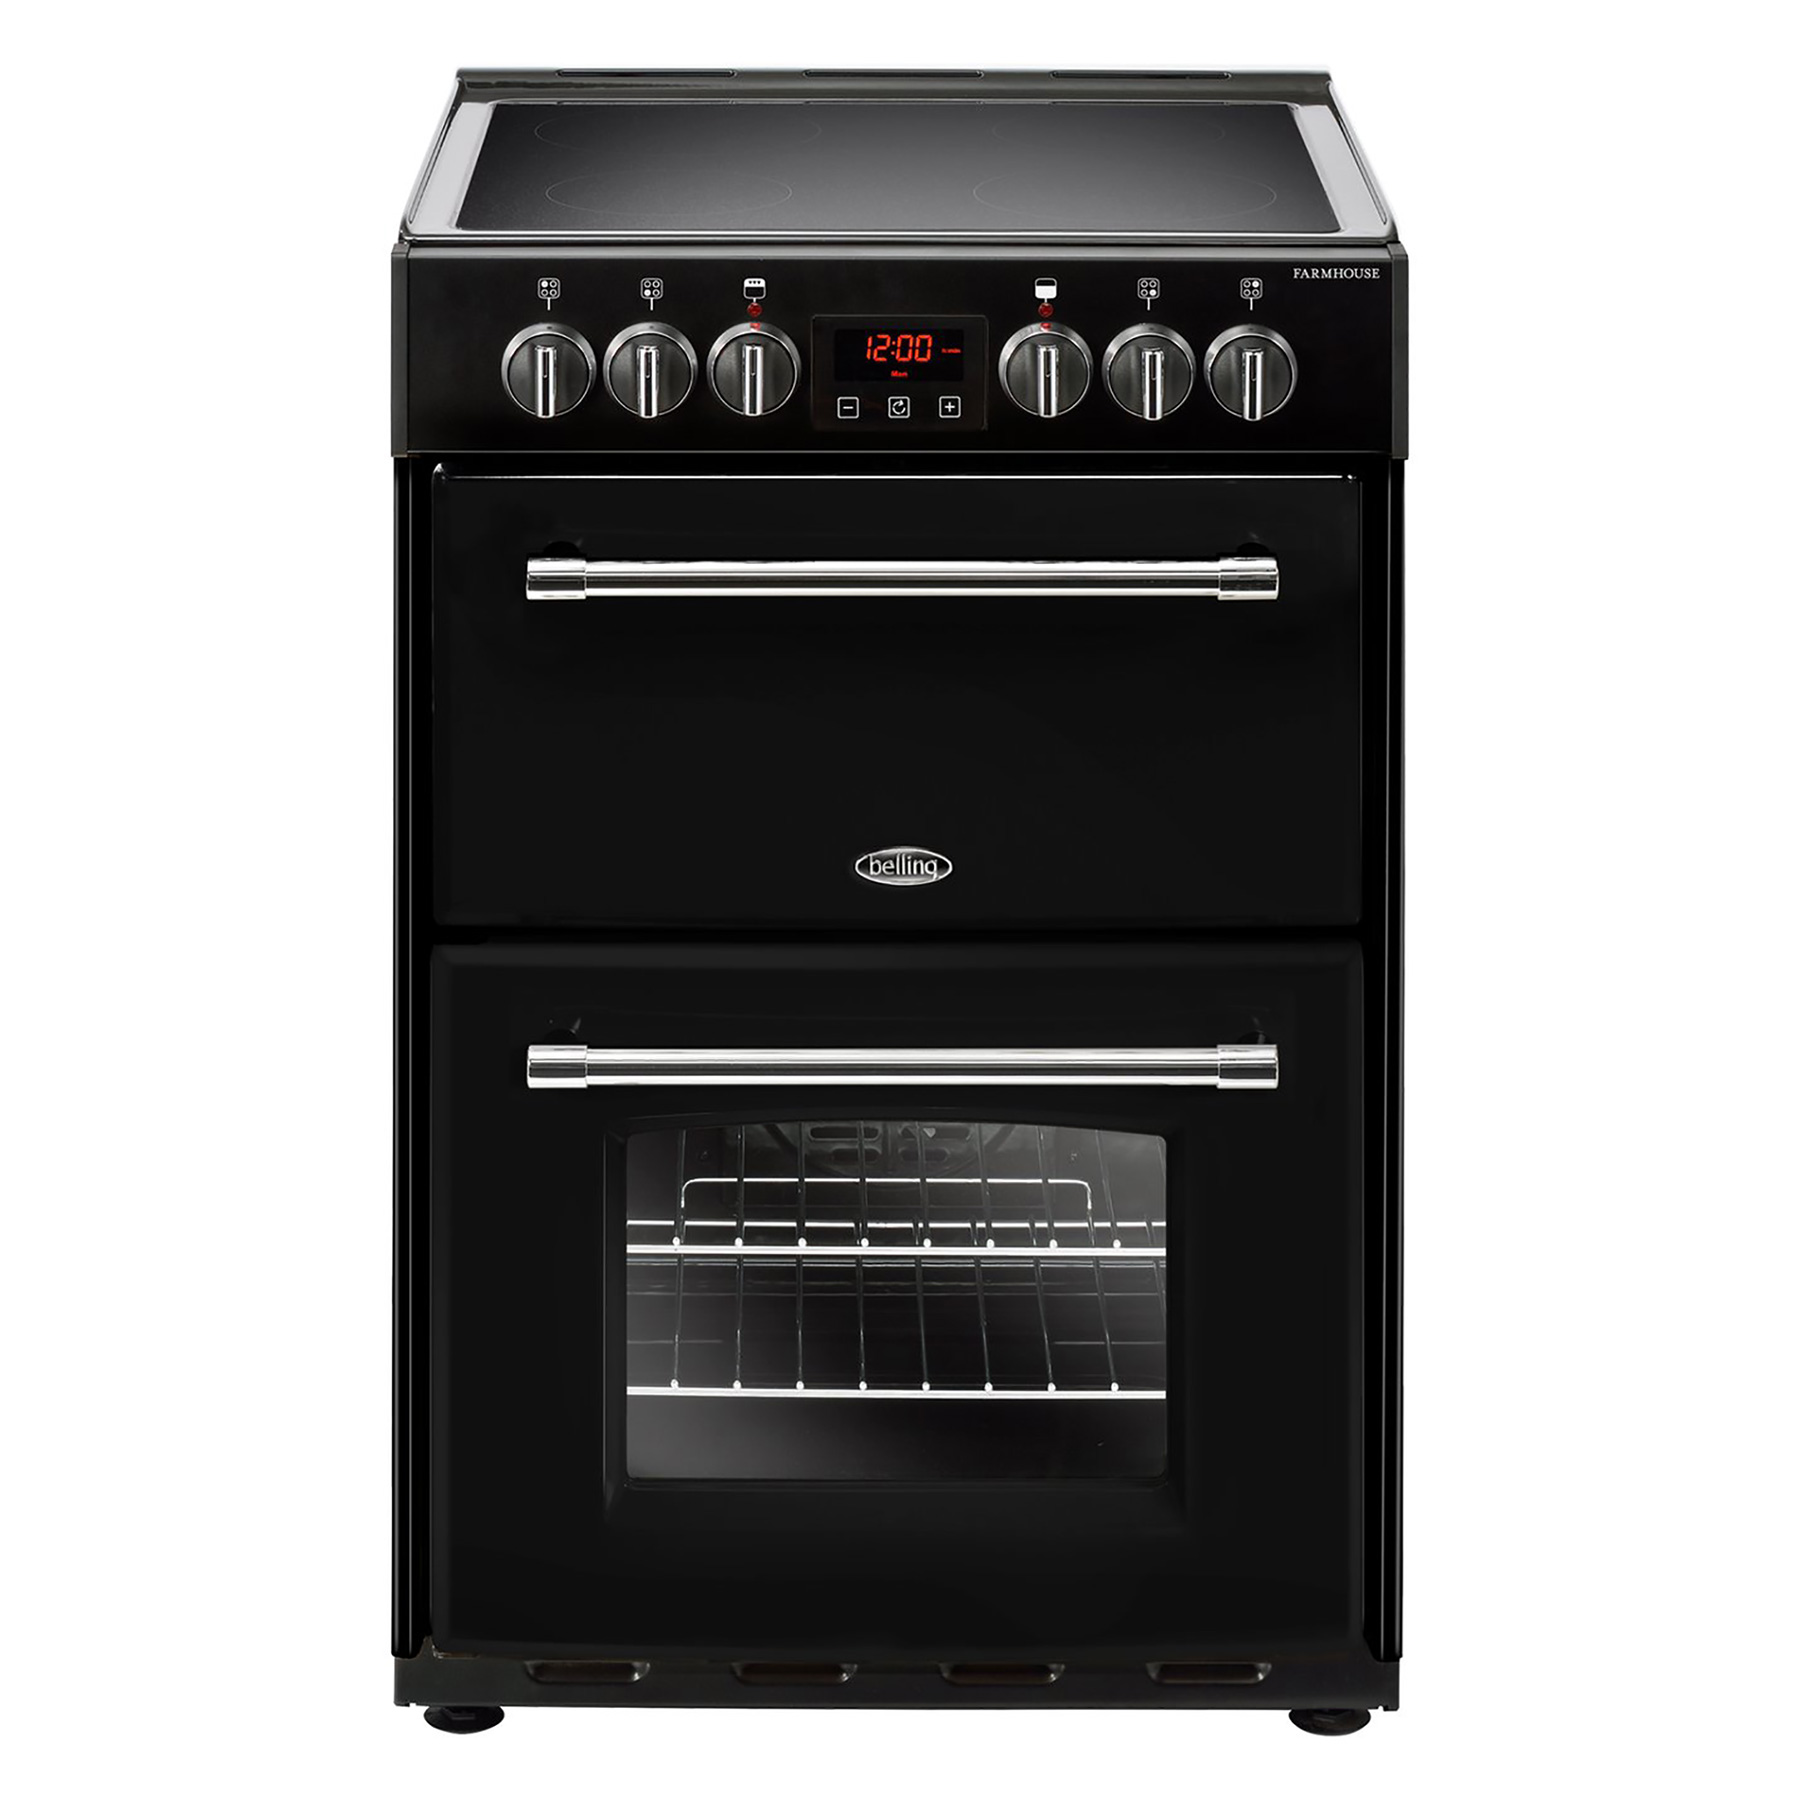 Image of Belling 444444711 60cm Farmhouse Double Oven Cooker in Black Ceramic H